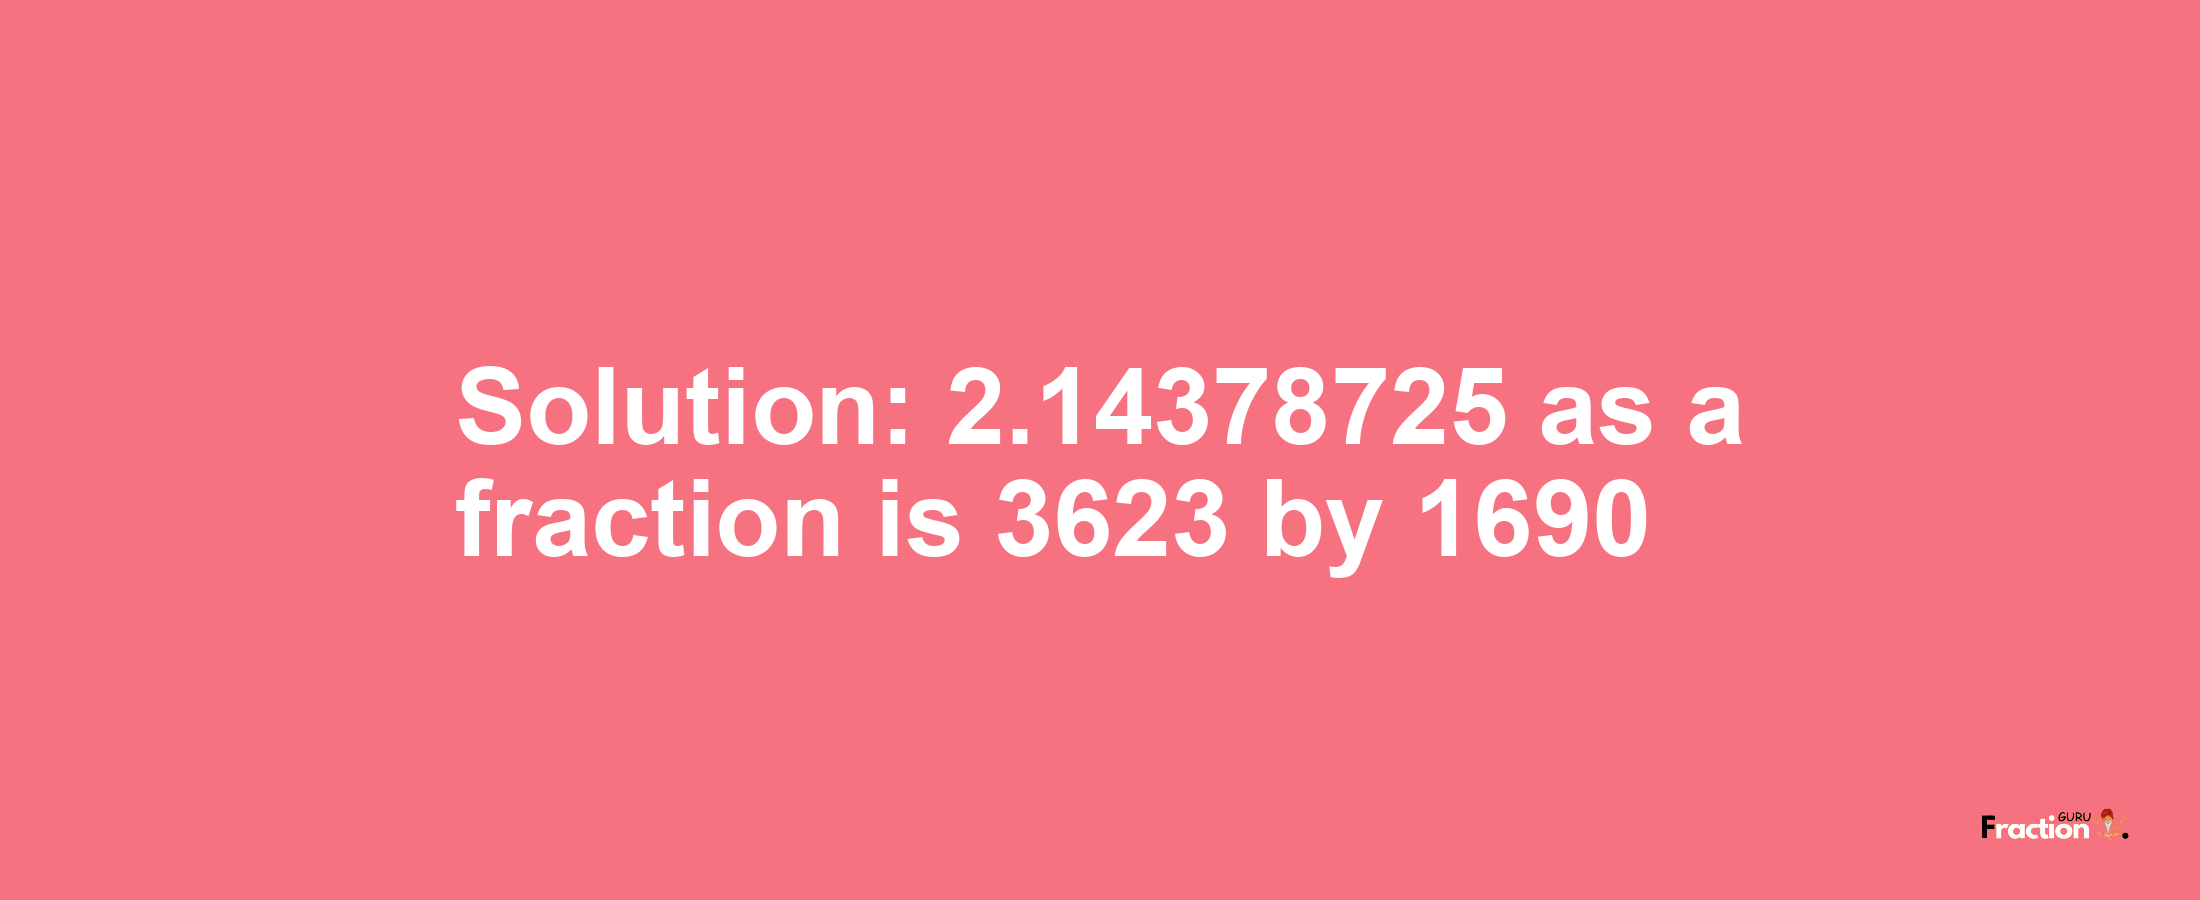 Solution:2.14378725 as a fraction is 3623/1690